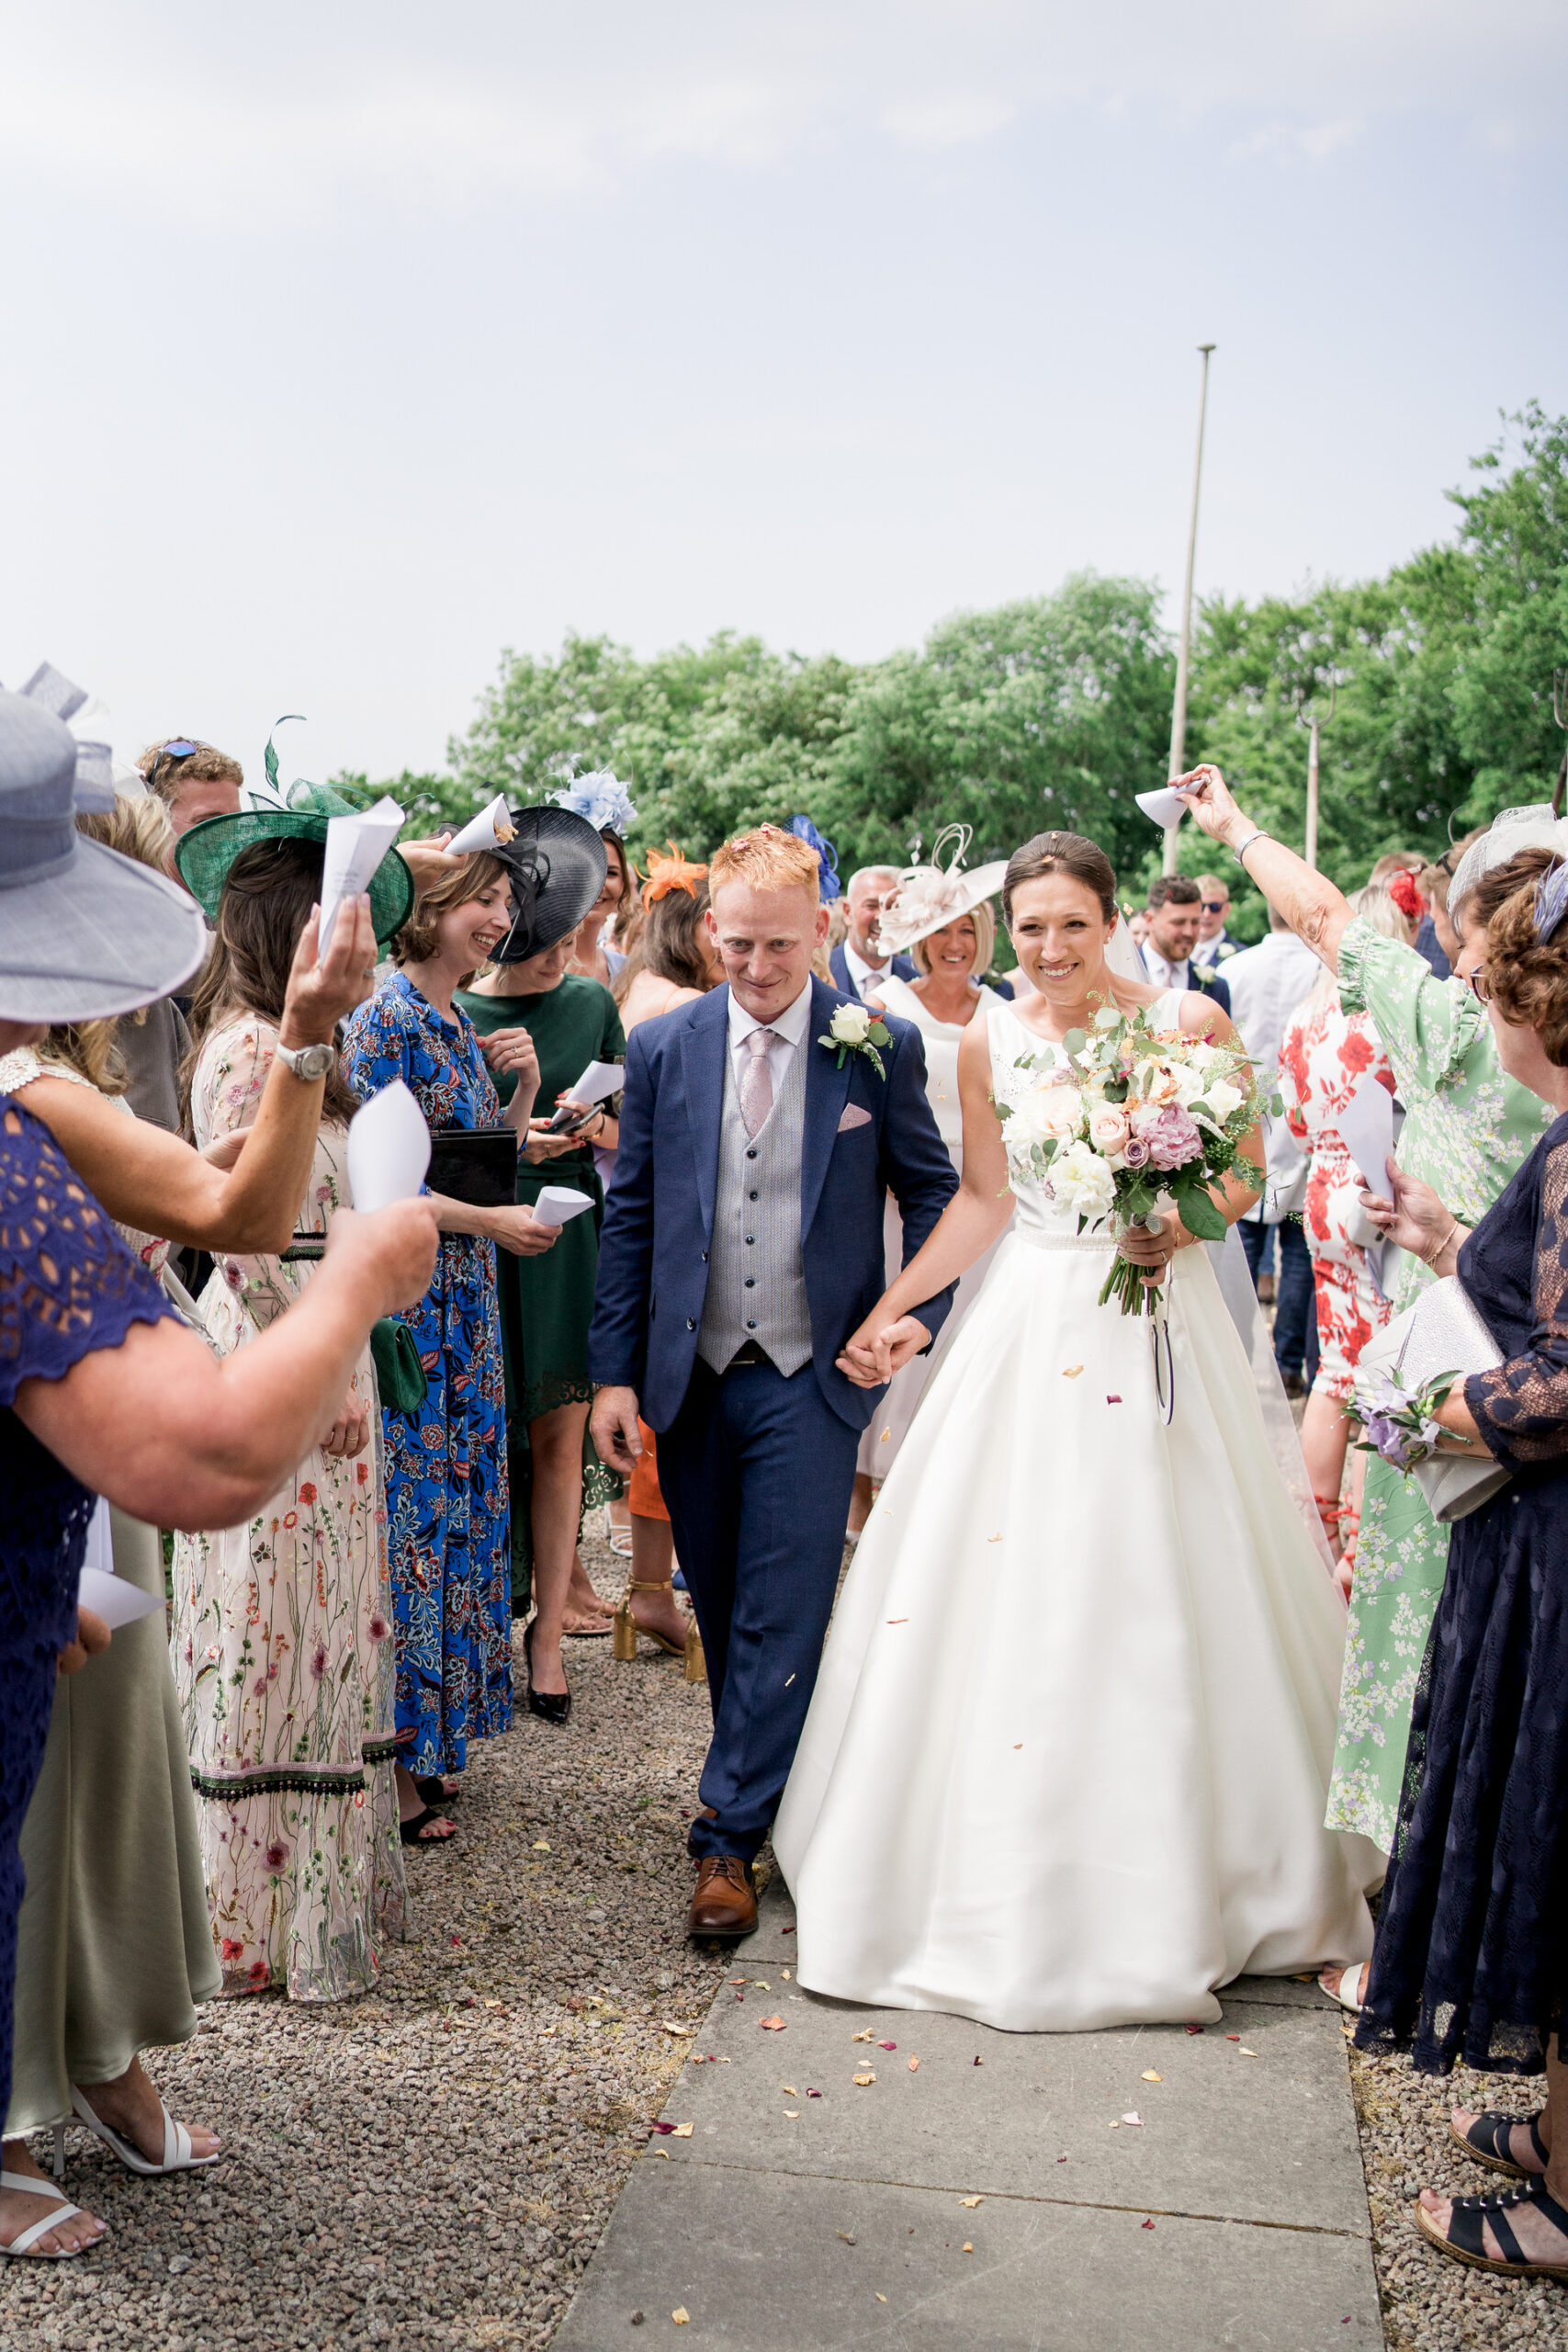 bride and groom walk through guests throwing confetti